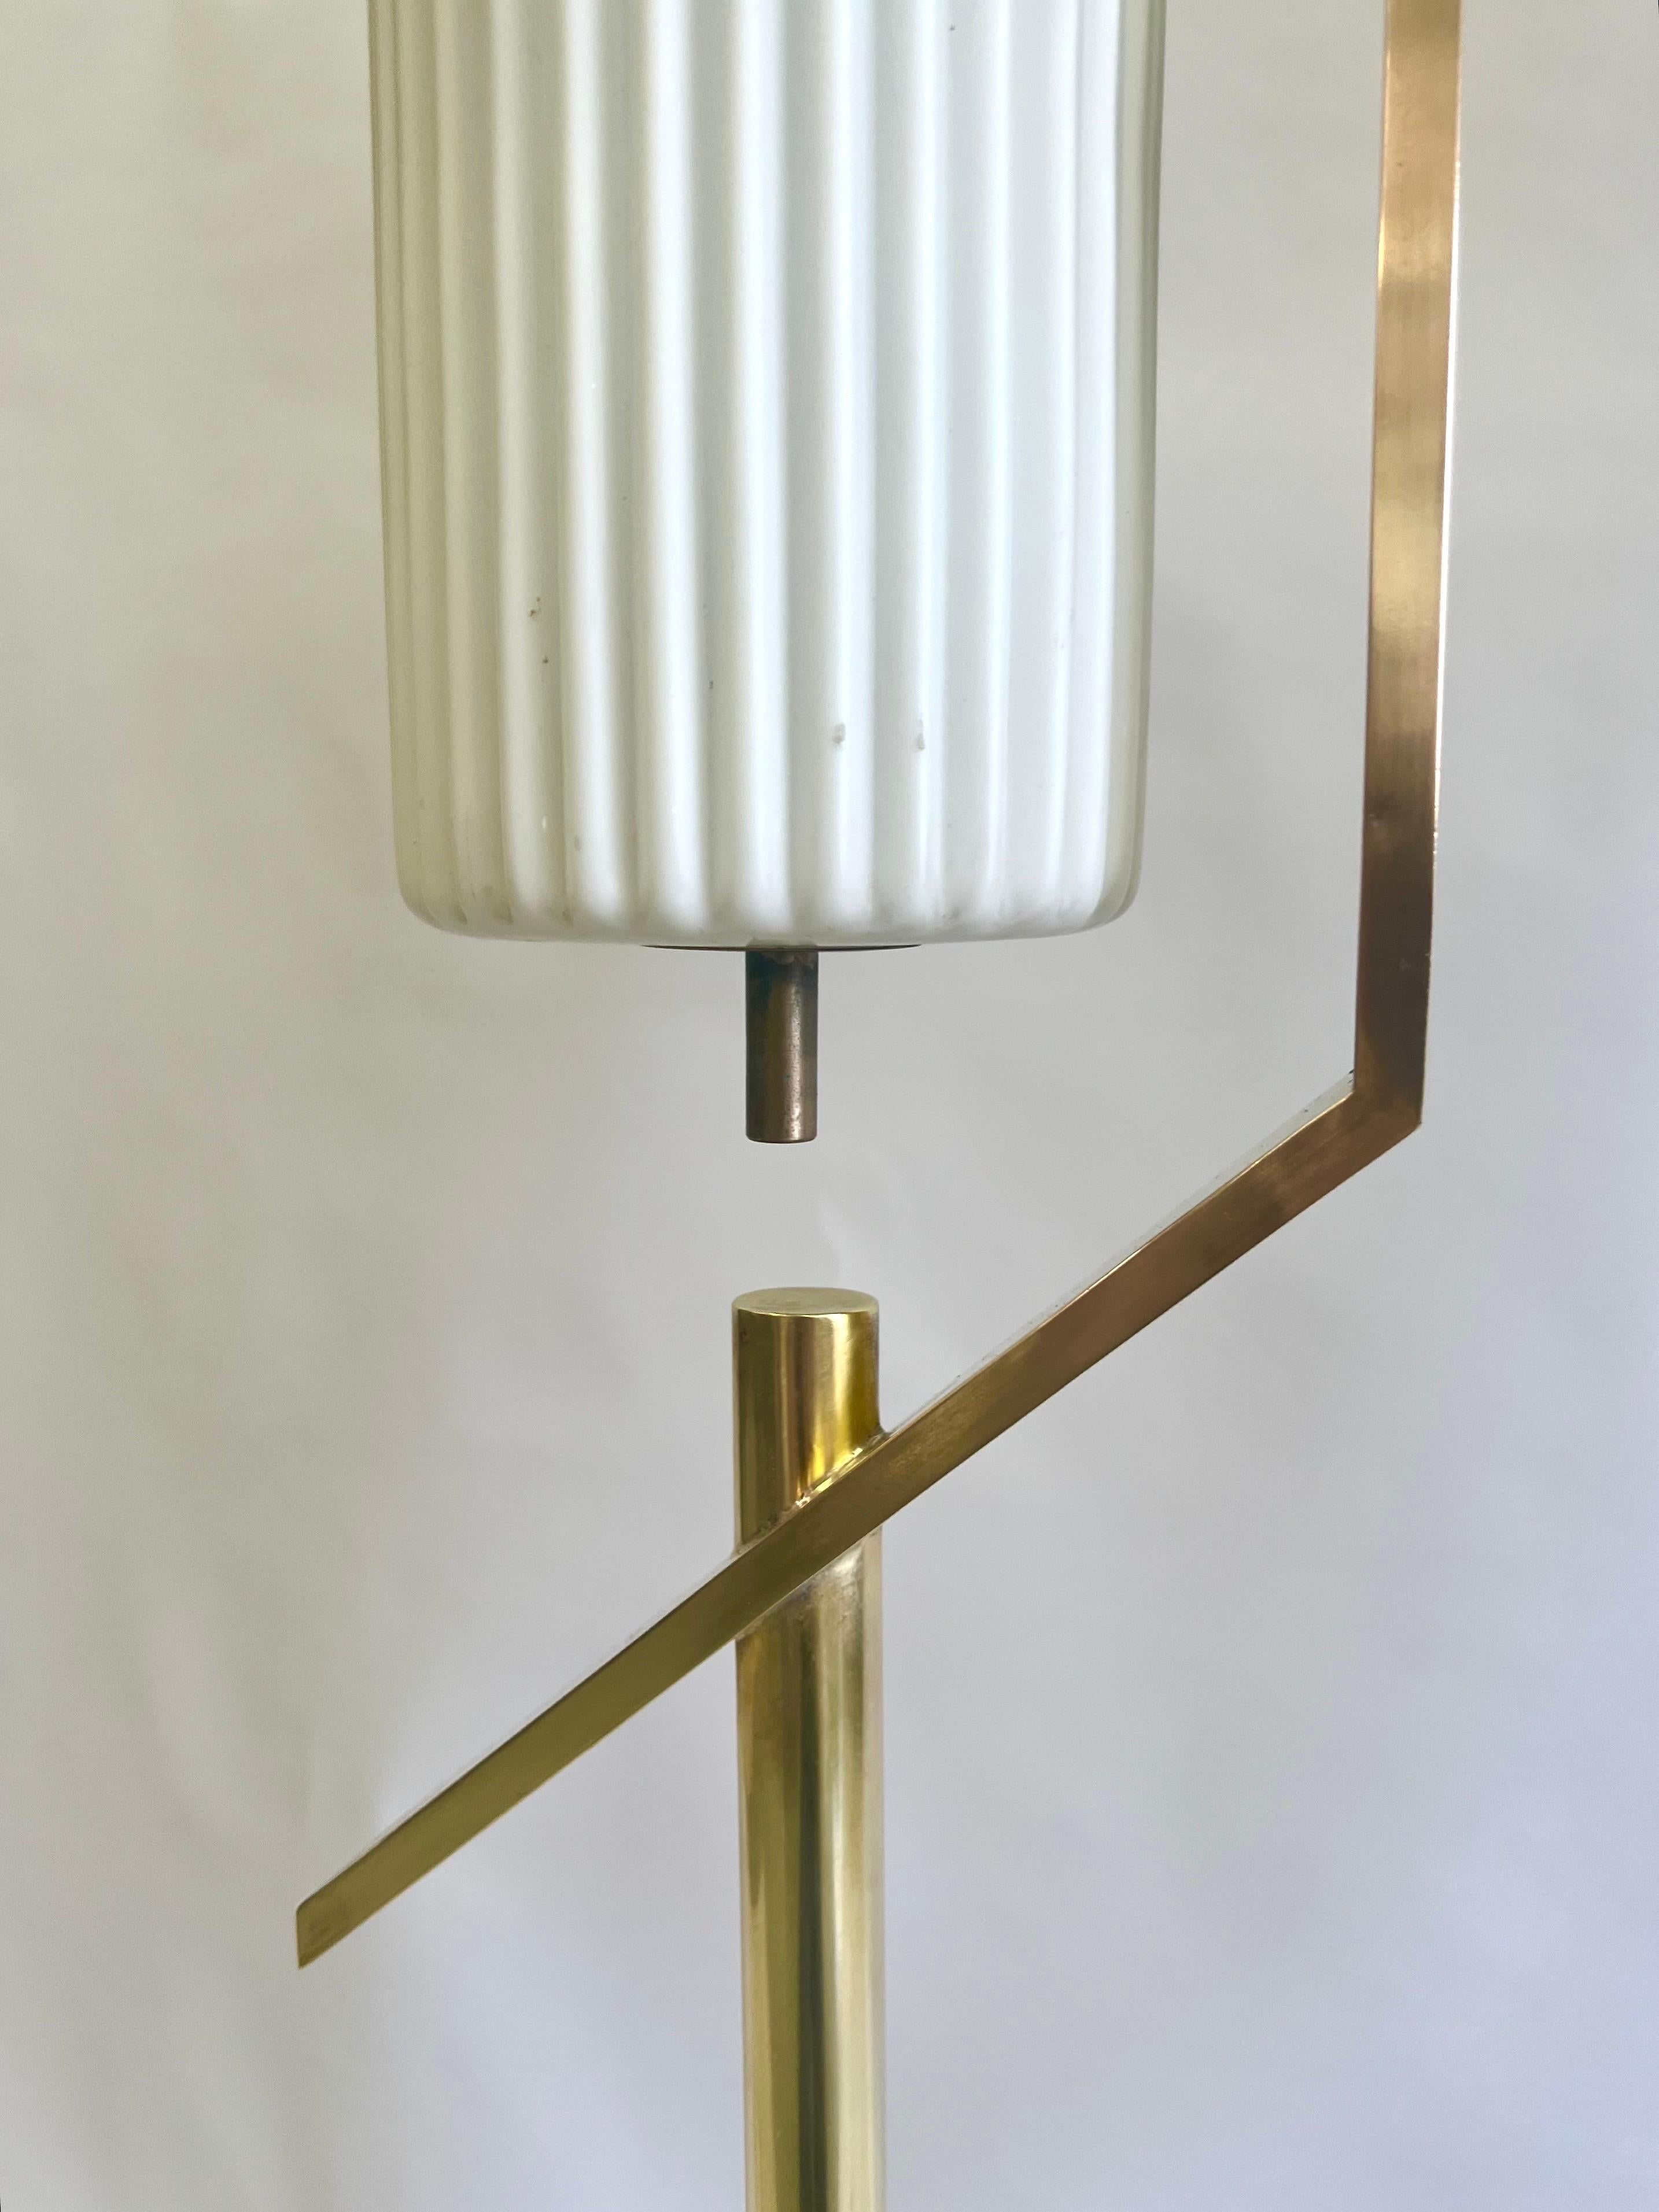 Mid-20th Century Rare & Iconic Italian MId-Century Floor Lamp #256 by Angelo Lelli for Arredoluce For Sale